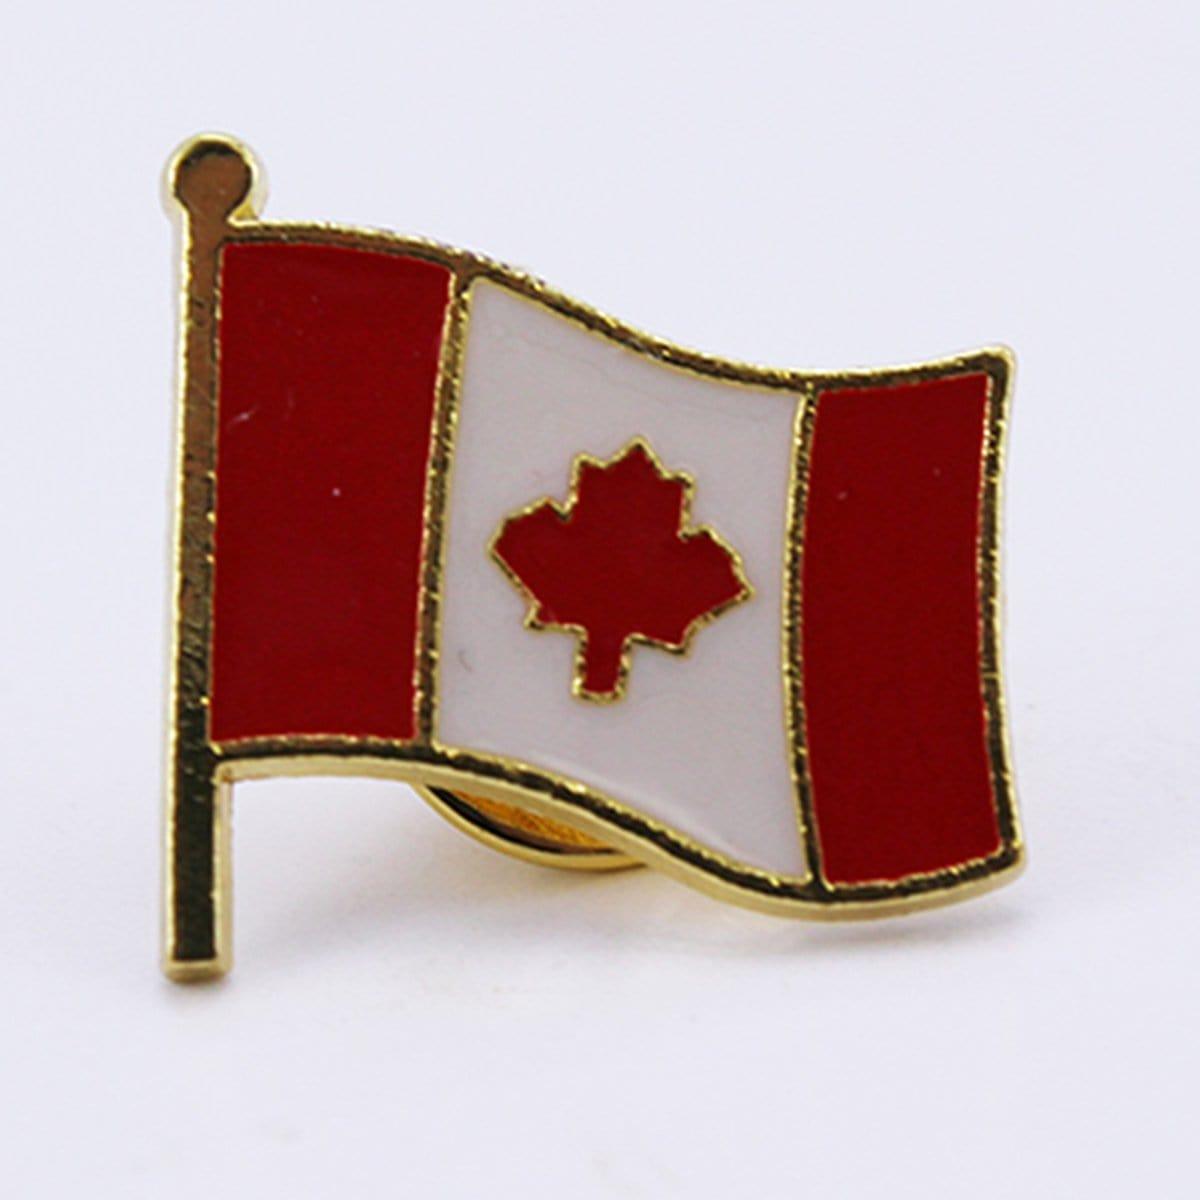 Buy Canada Day Canada - Lapel Pin sold at Party Expert